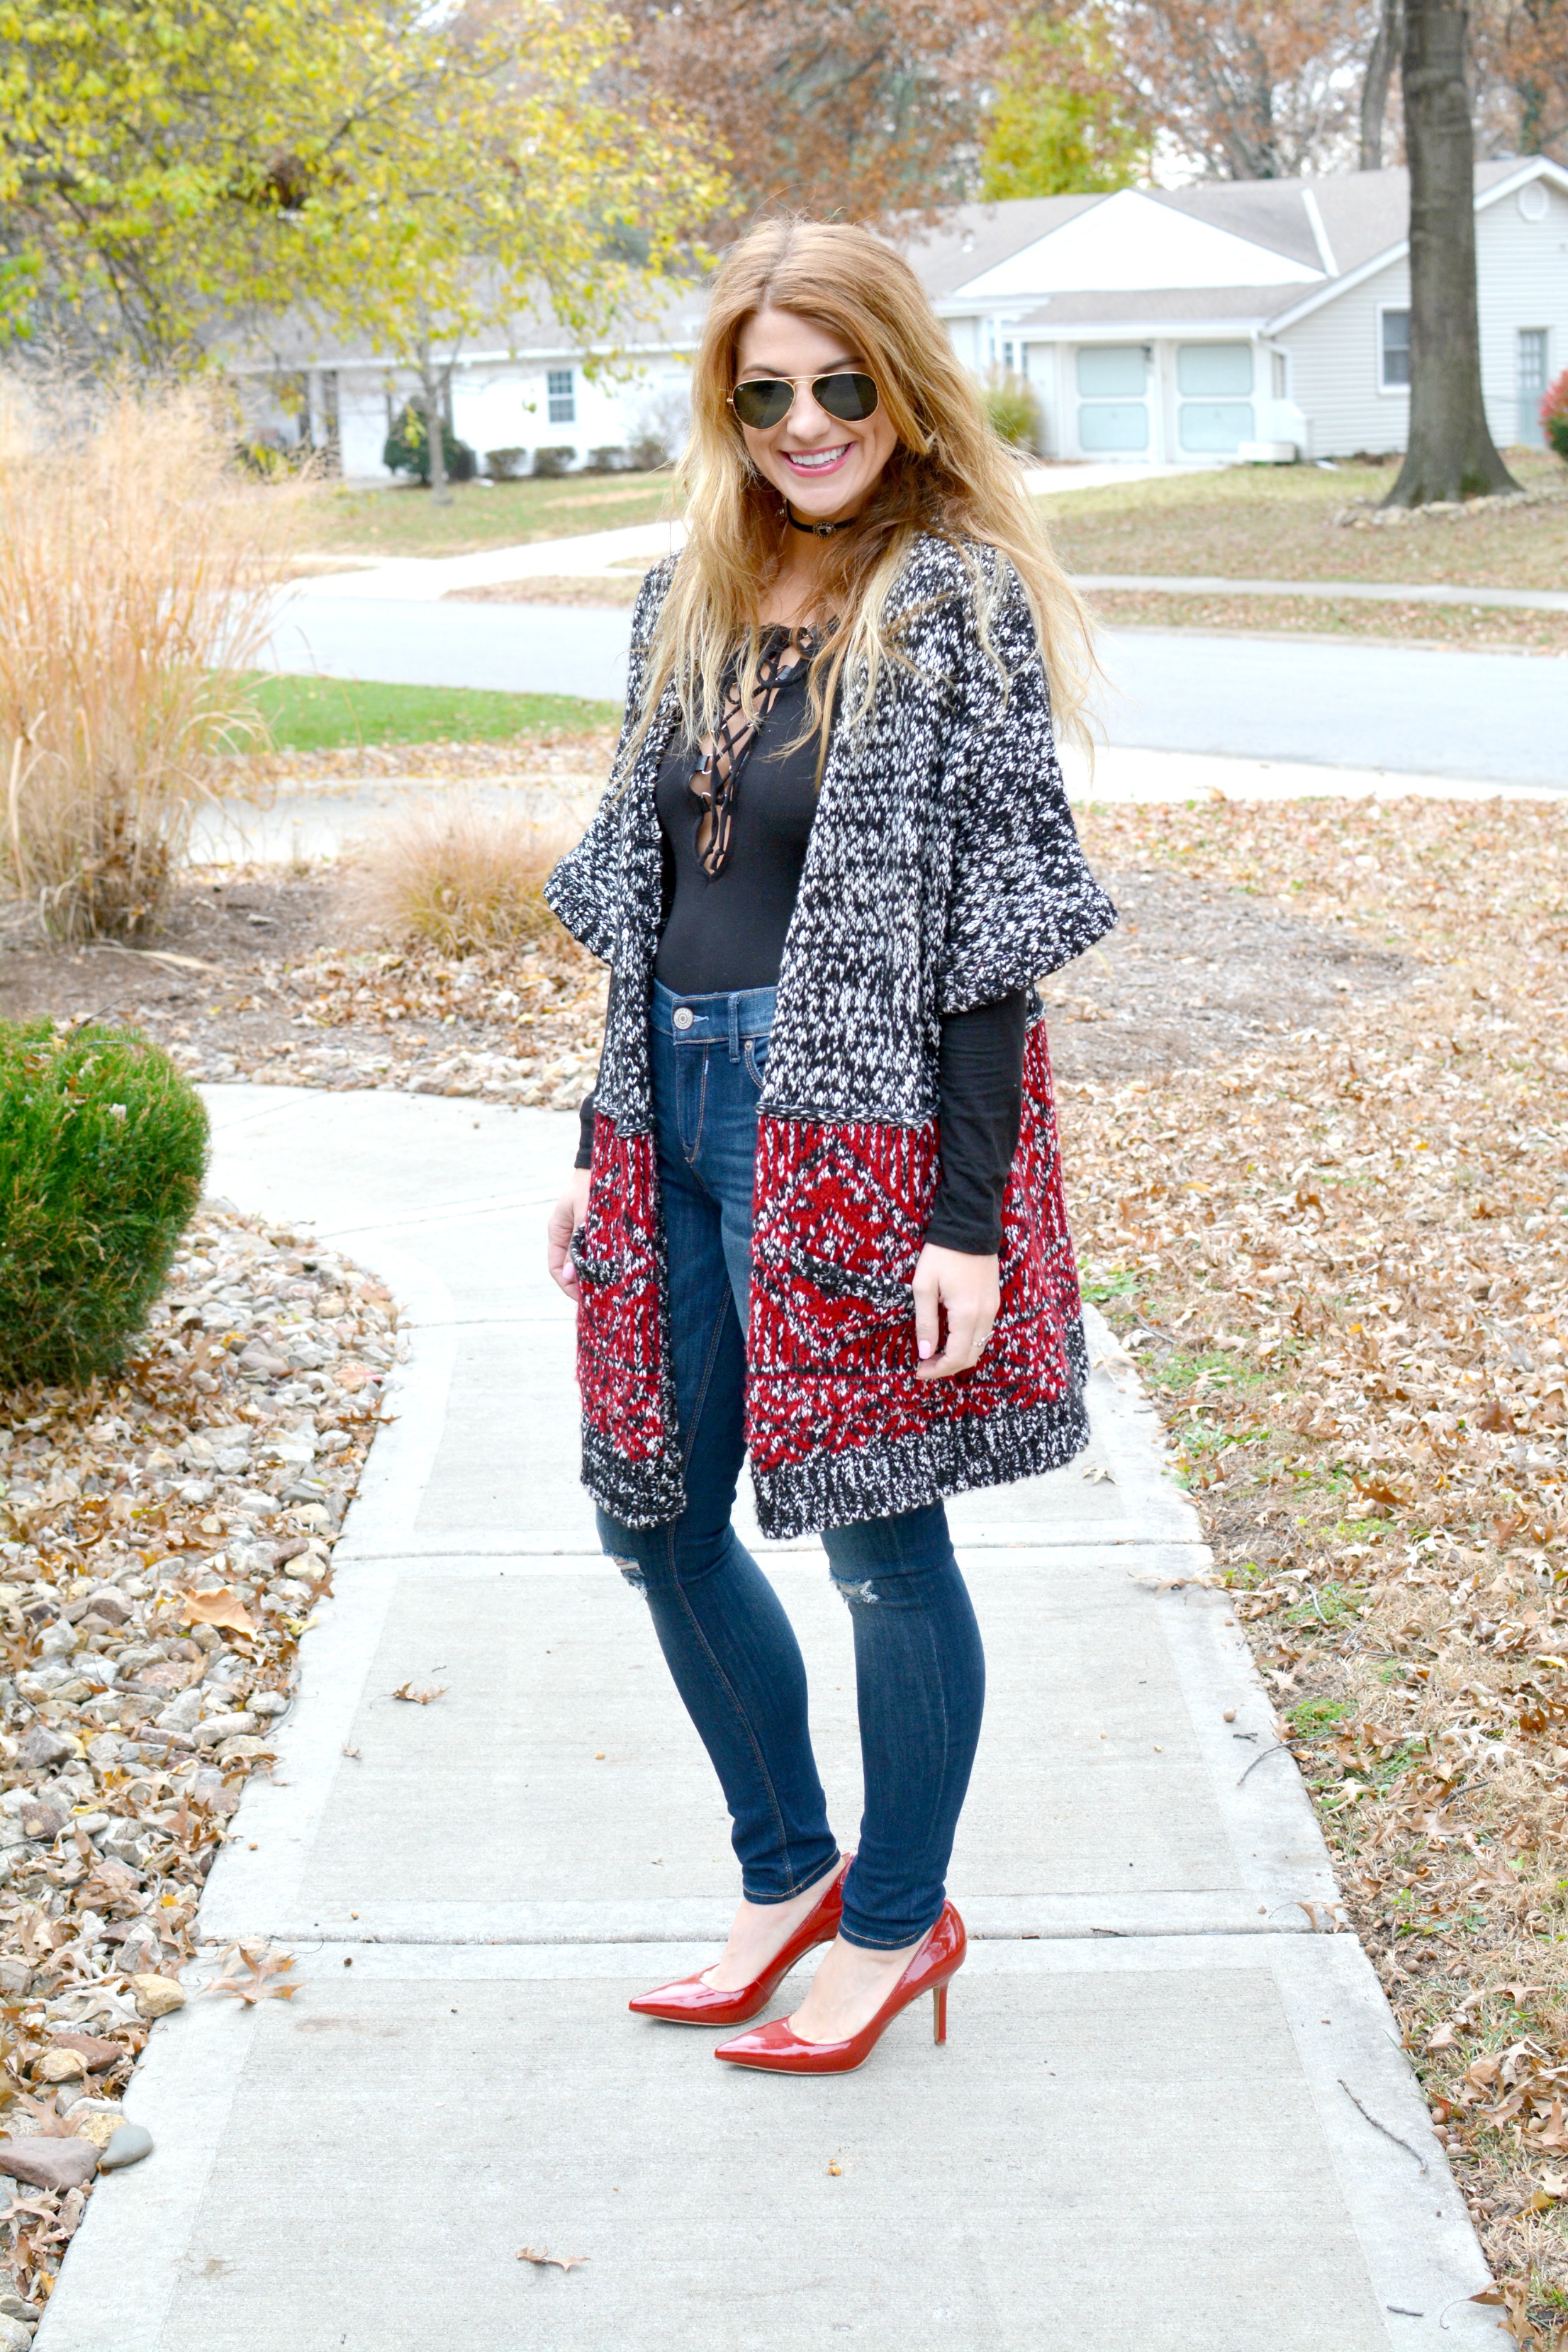 Ashley from LSR in a long cardigan, lace-up bodysuit, and red pumps